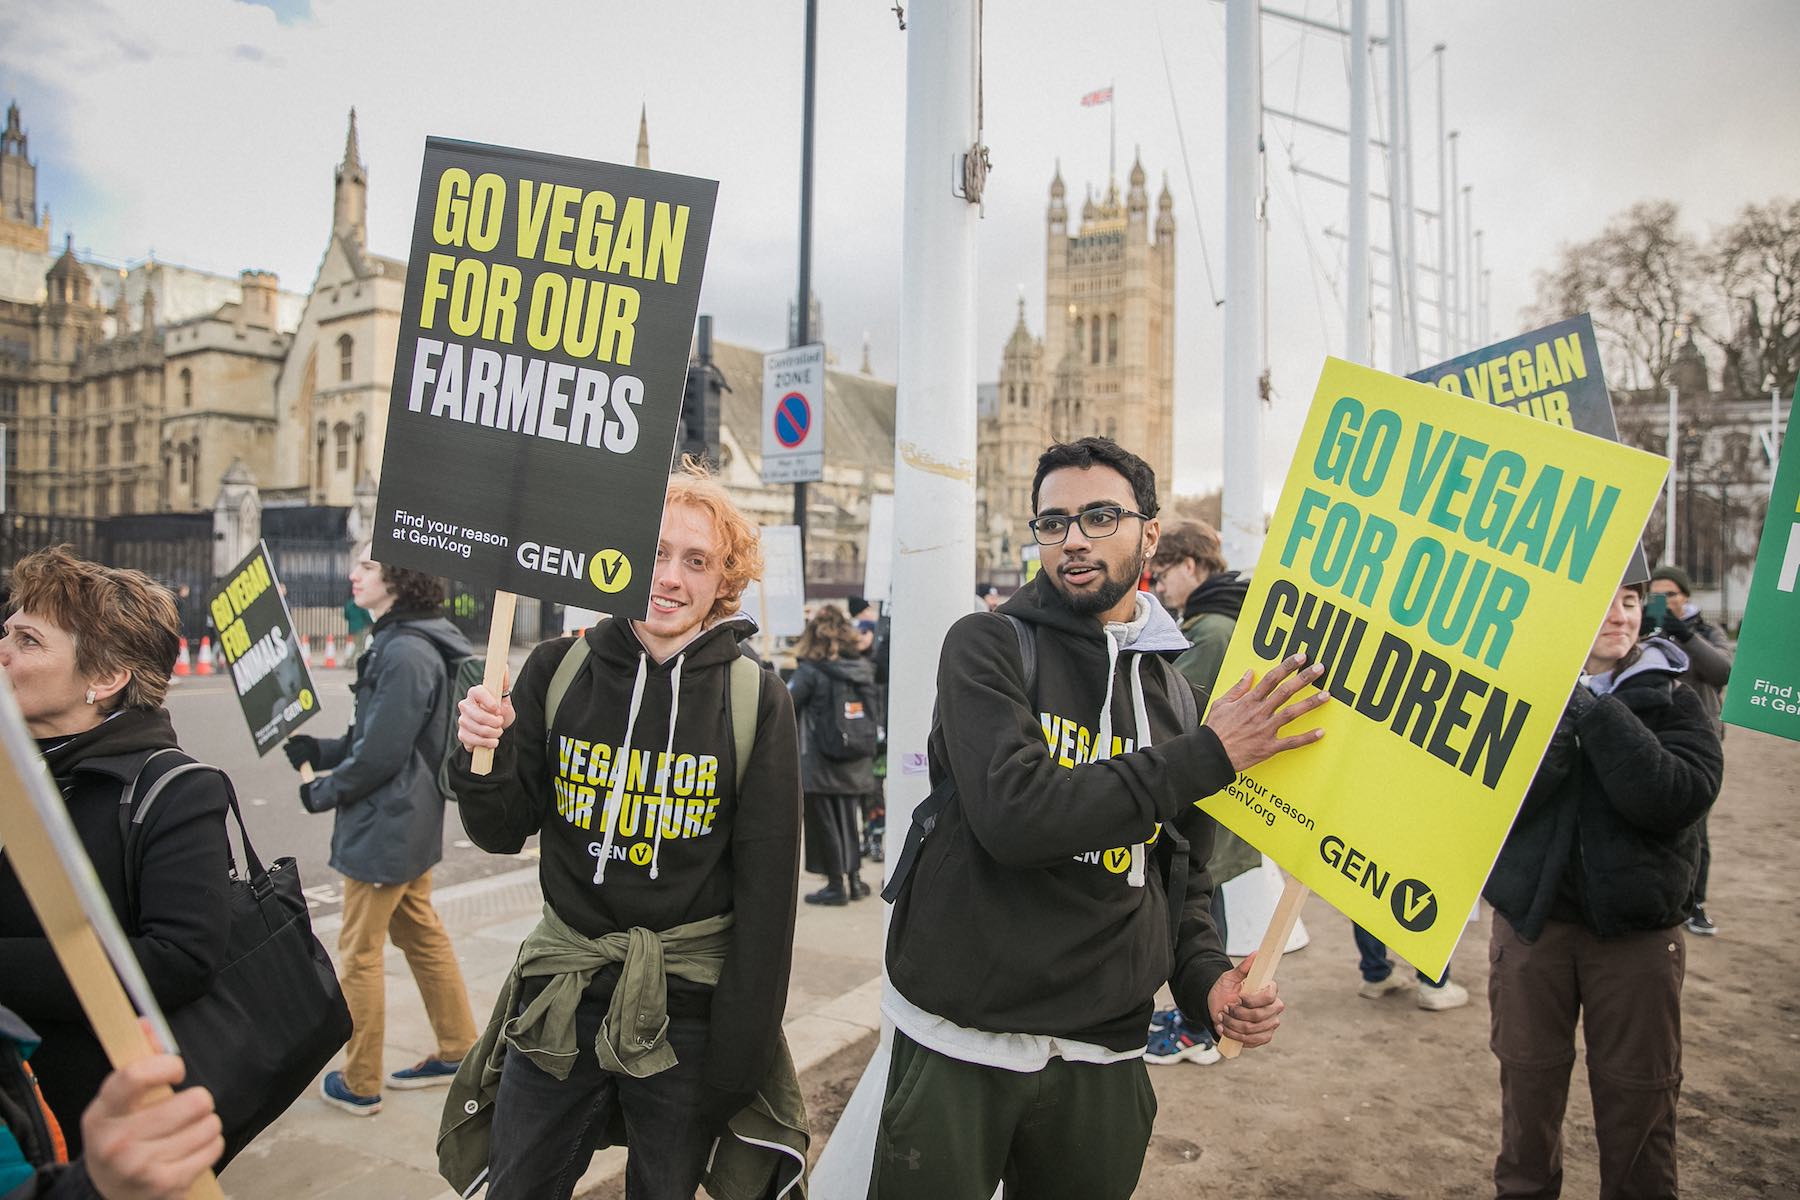 Vegan for our Future - GenV campaign